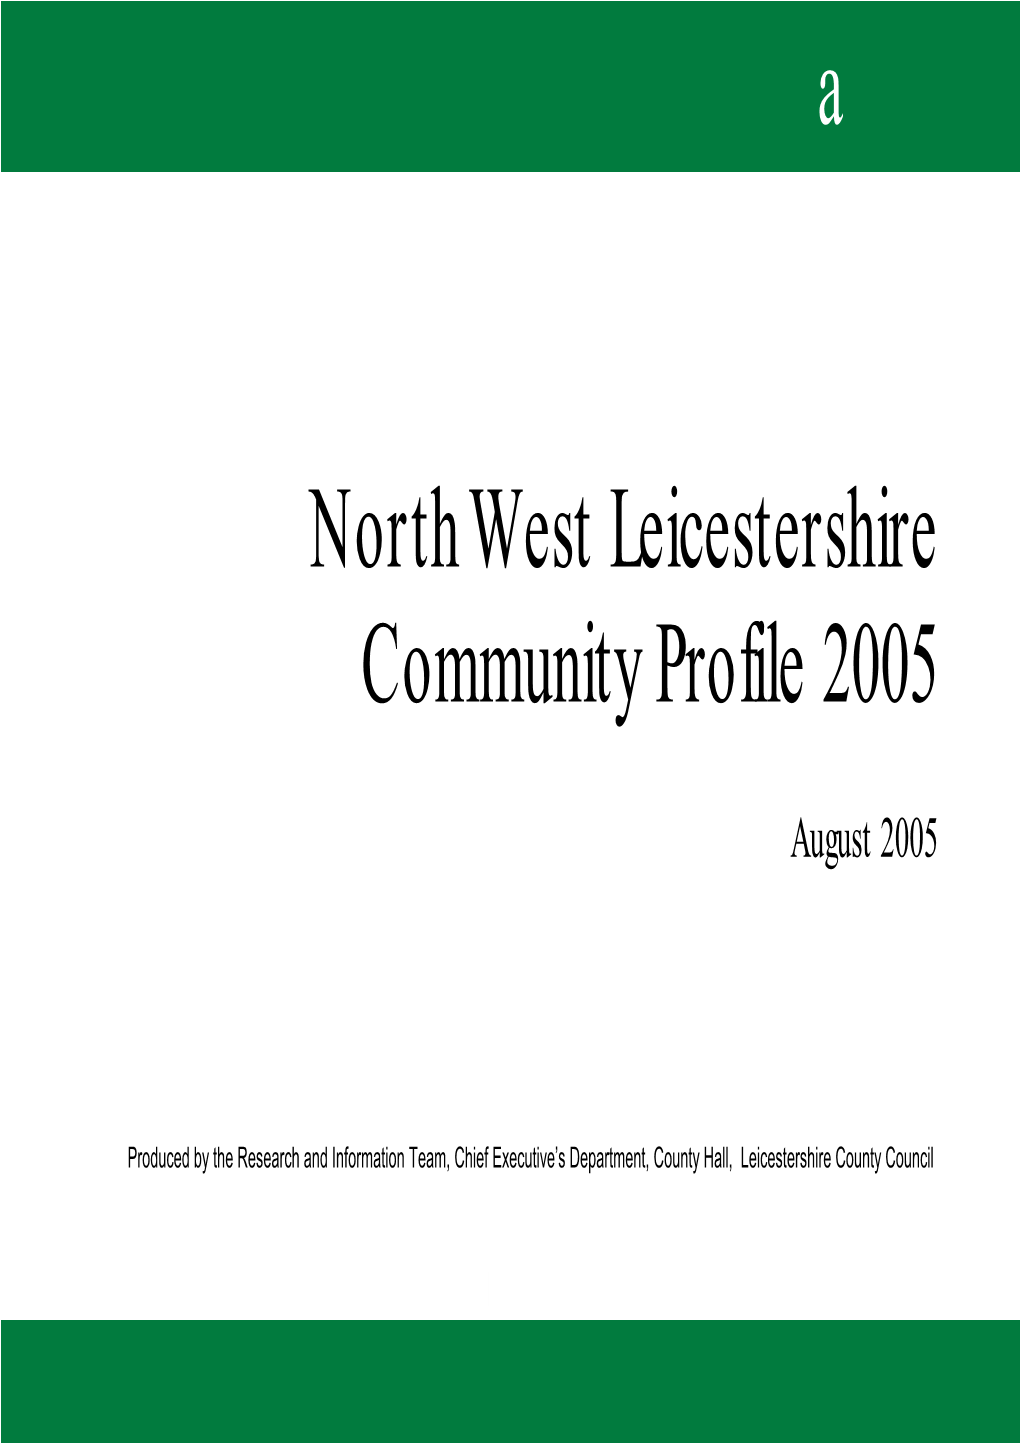 North West Leicestershire Community Profile 2005